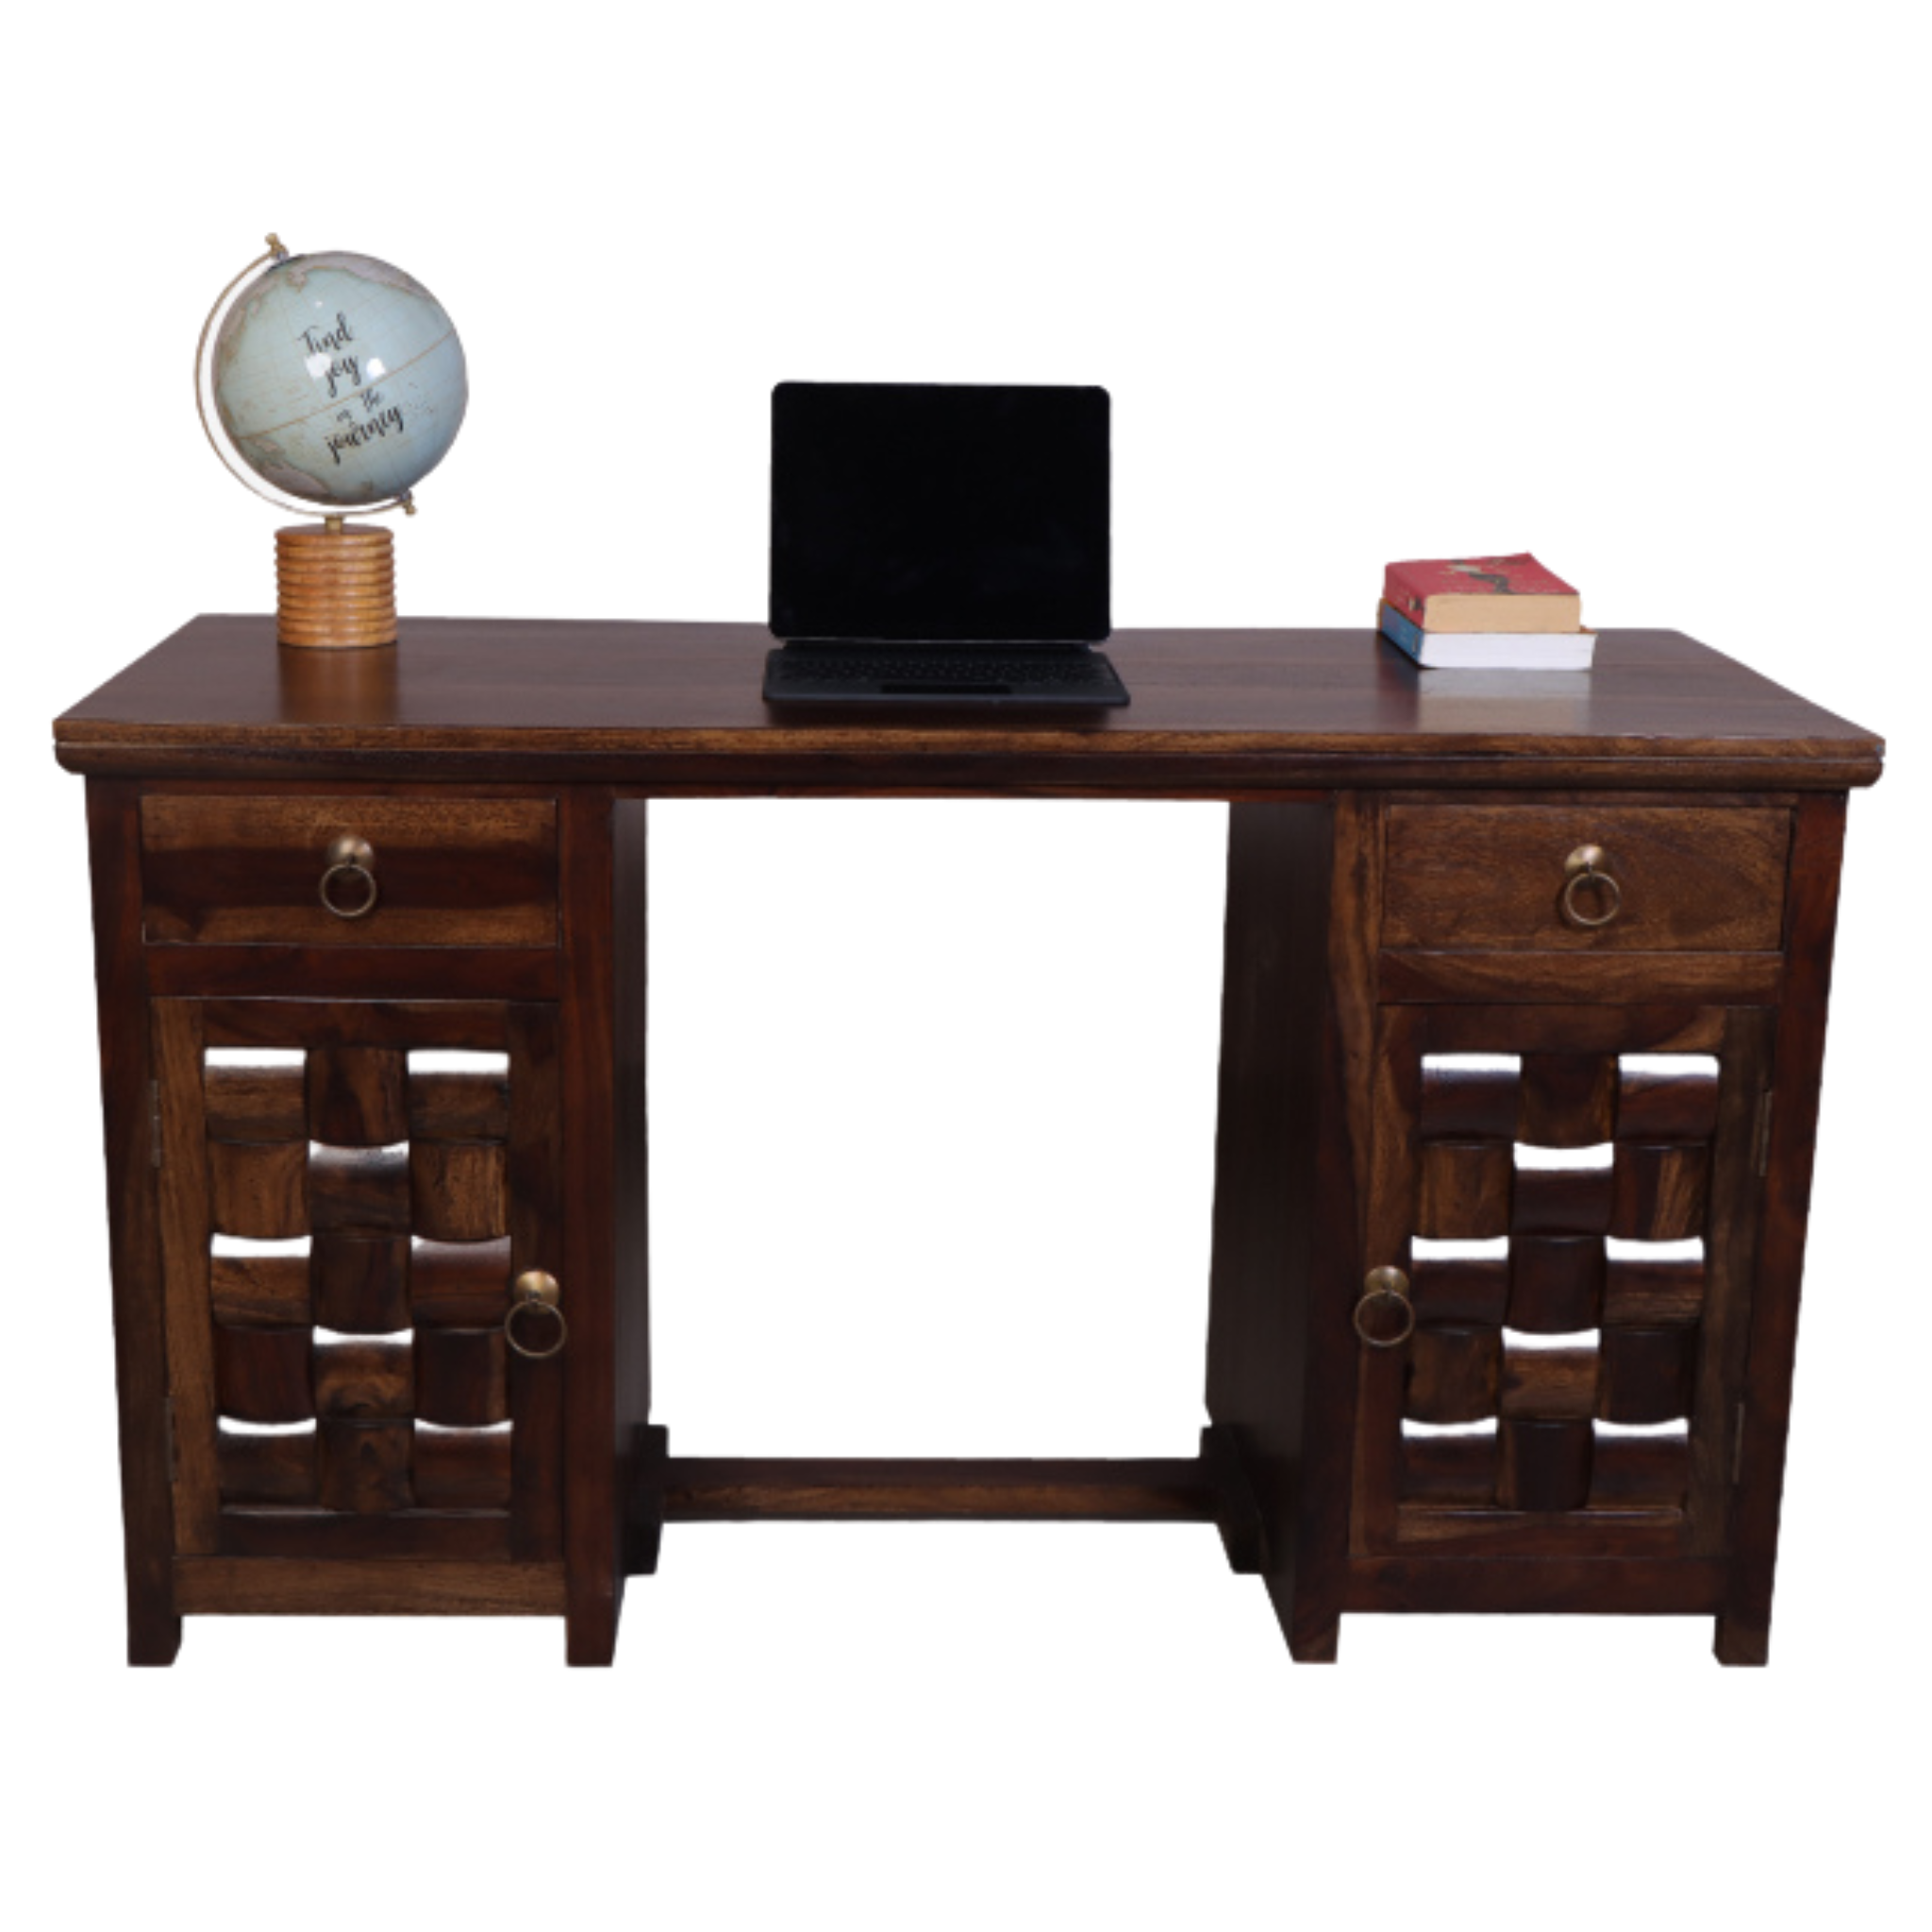 Nivaar Office Table with Two Drawers and Two Cabinet Storage